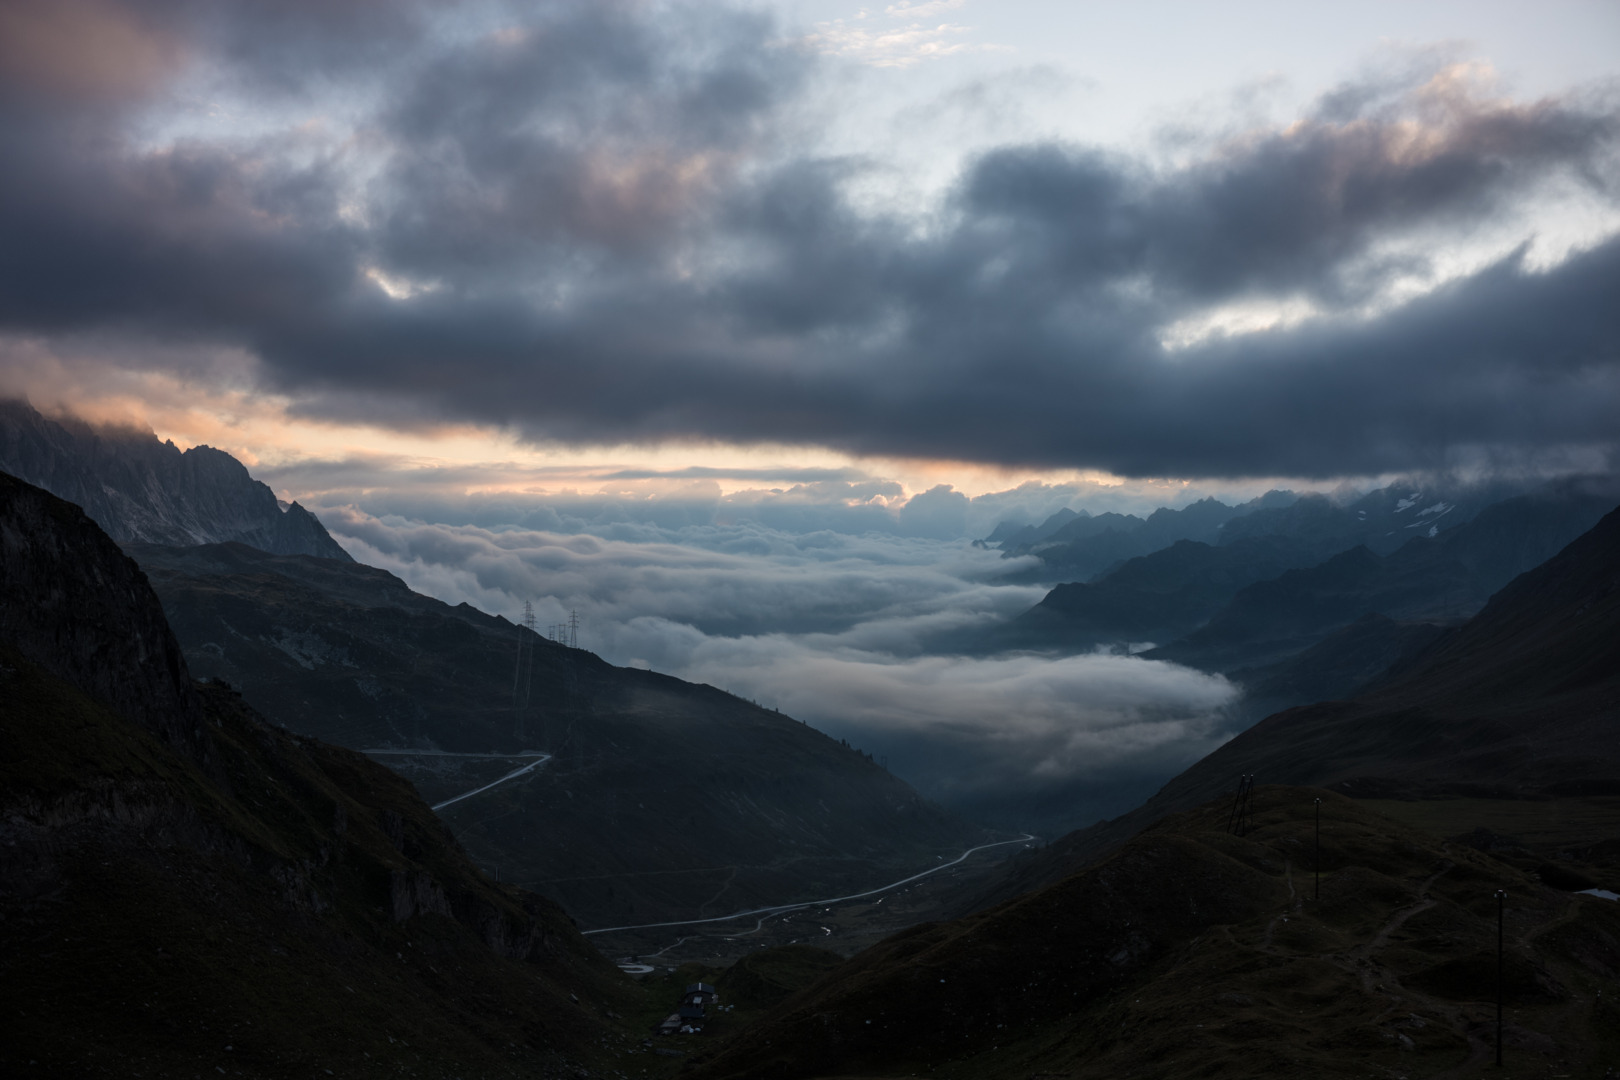 And the next morning. The silver ribbon in the valley is the road to Nufenenpass. Zeiss Distagon 35/1.4 on Leica M10. 1/500 sec, f/3.4., ISO 200.